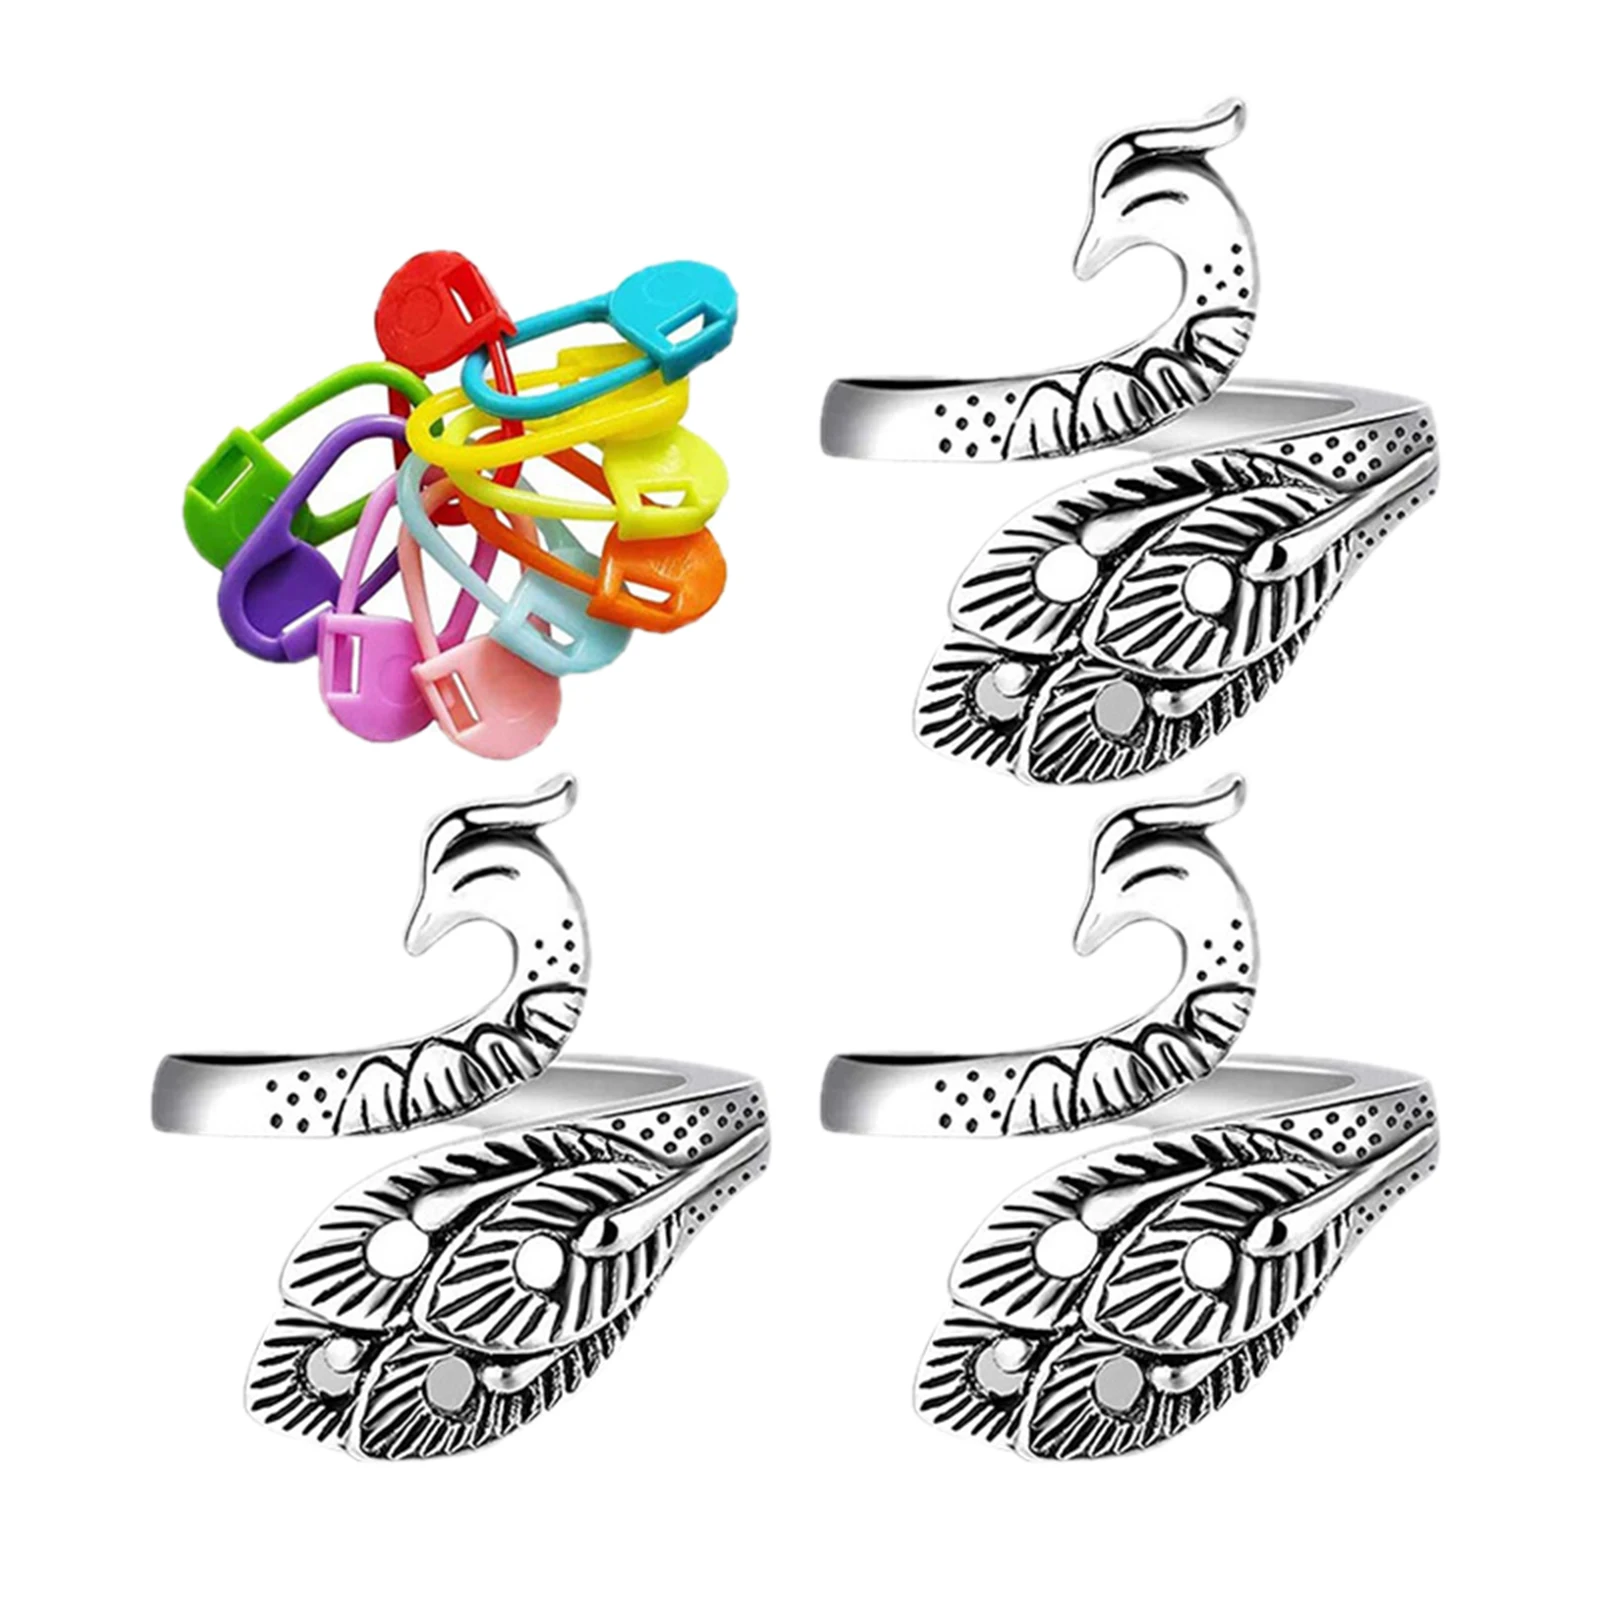 3Pieces Crochet Ring Kit w/ 50 Stitch Marker Peacock Open Finger Ring Knitting Accessories